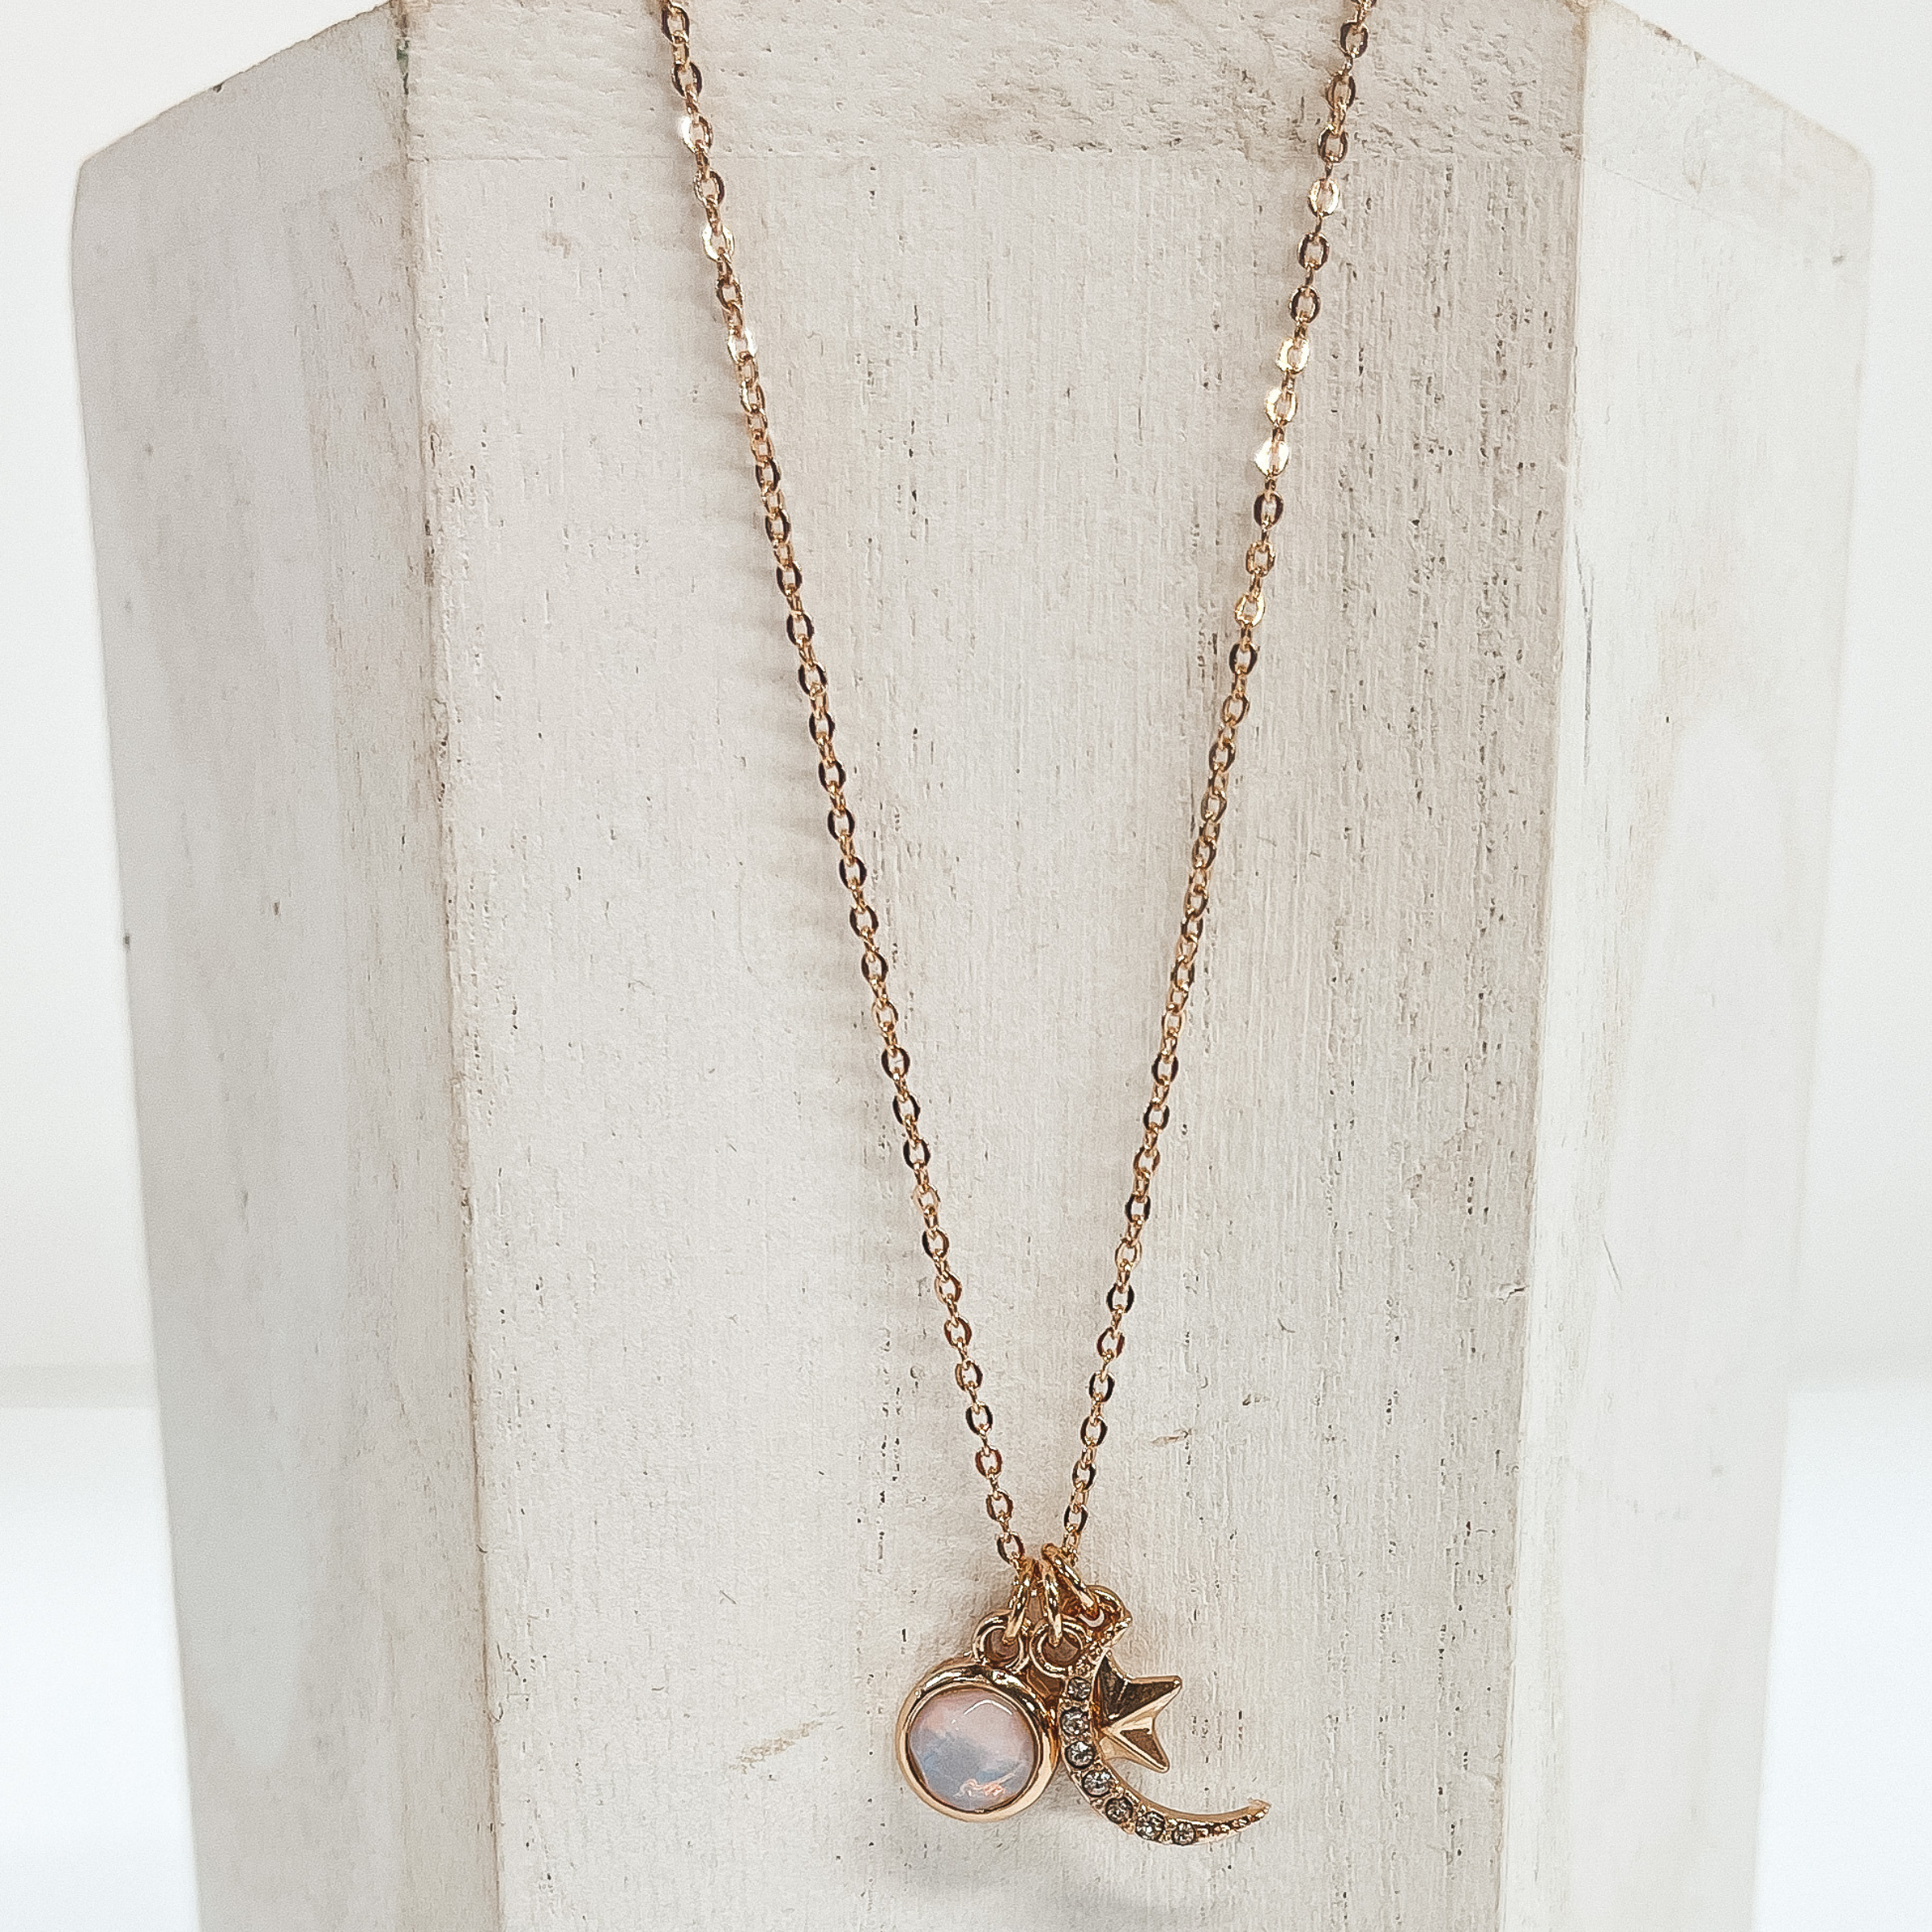 This is a thin gold chain necklace with three kinds  of pendants. One is a circle pendant with an opal  stone, a star, and a moon filled with CZ  crystals. Taken on a white block and white  background.